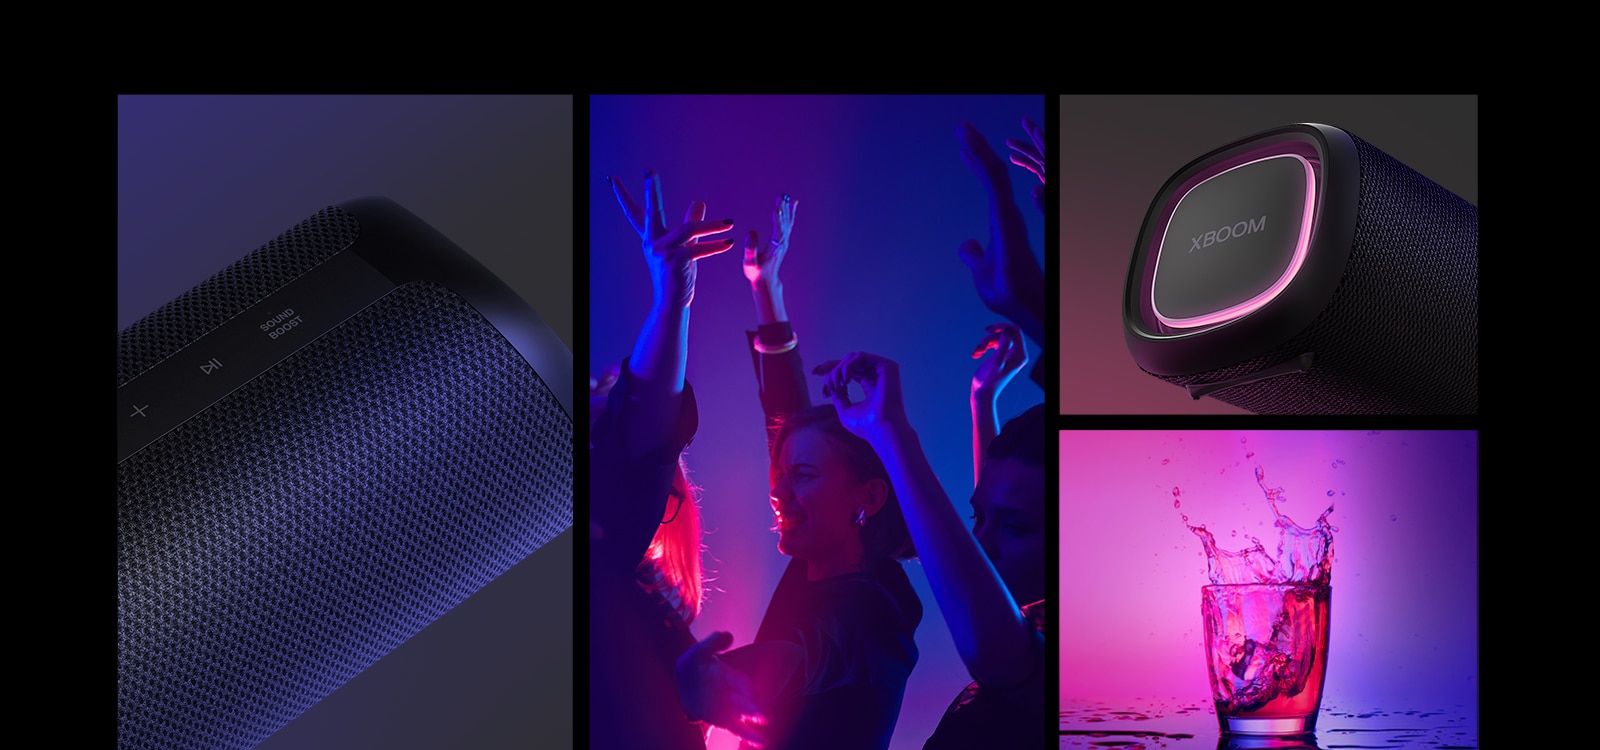 College. From left, close up view of LG XBOOM Go XG7. Next, an image of people enjoying the music. On the right from top to bottom: close-up view of the speaker with pink lighting and two glasses of drink.